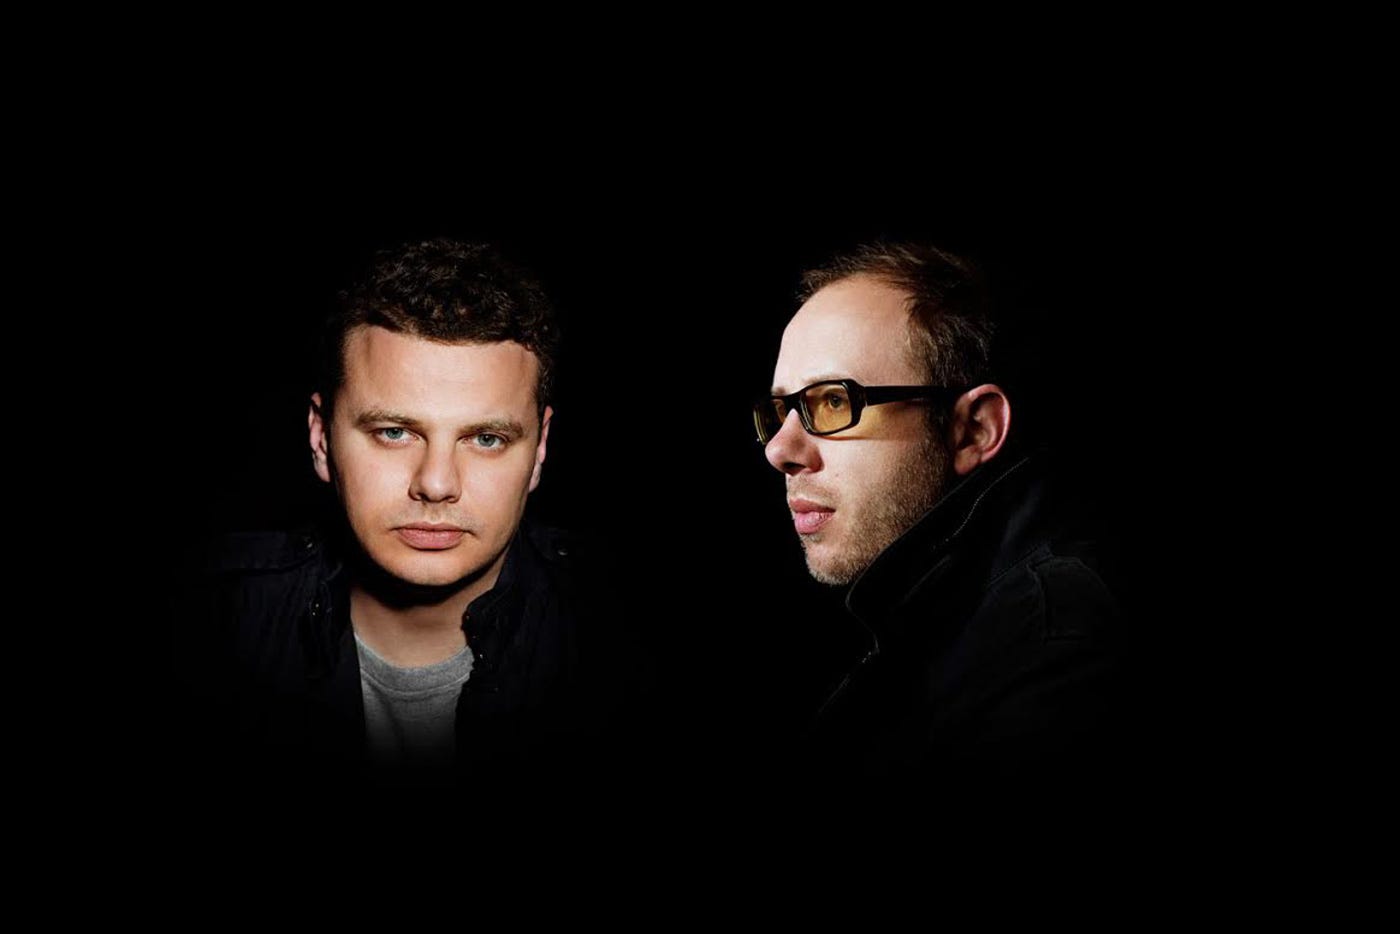 THE CHEMICAL BROTHERS